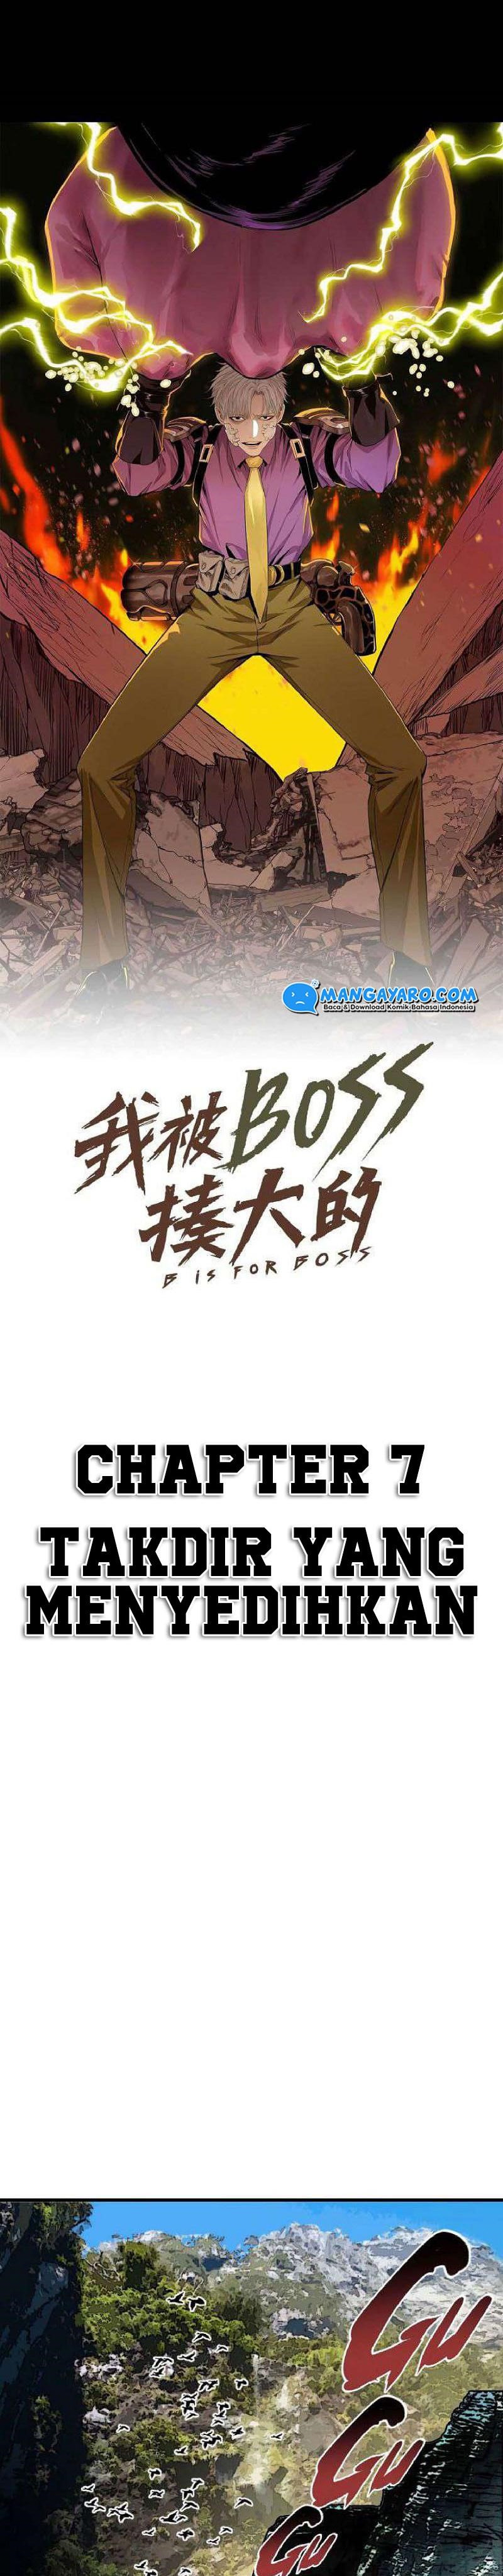 I Was Raised By The Boss Chapter 07